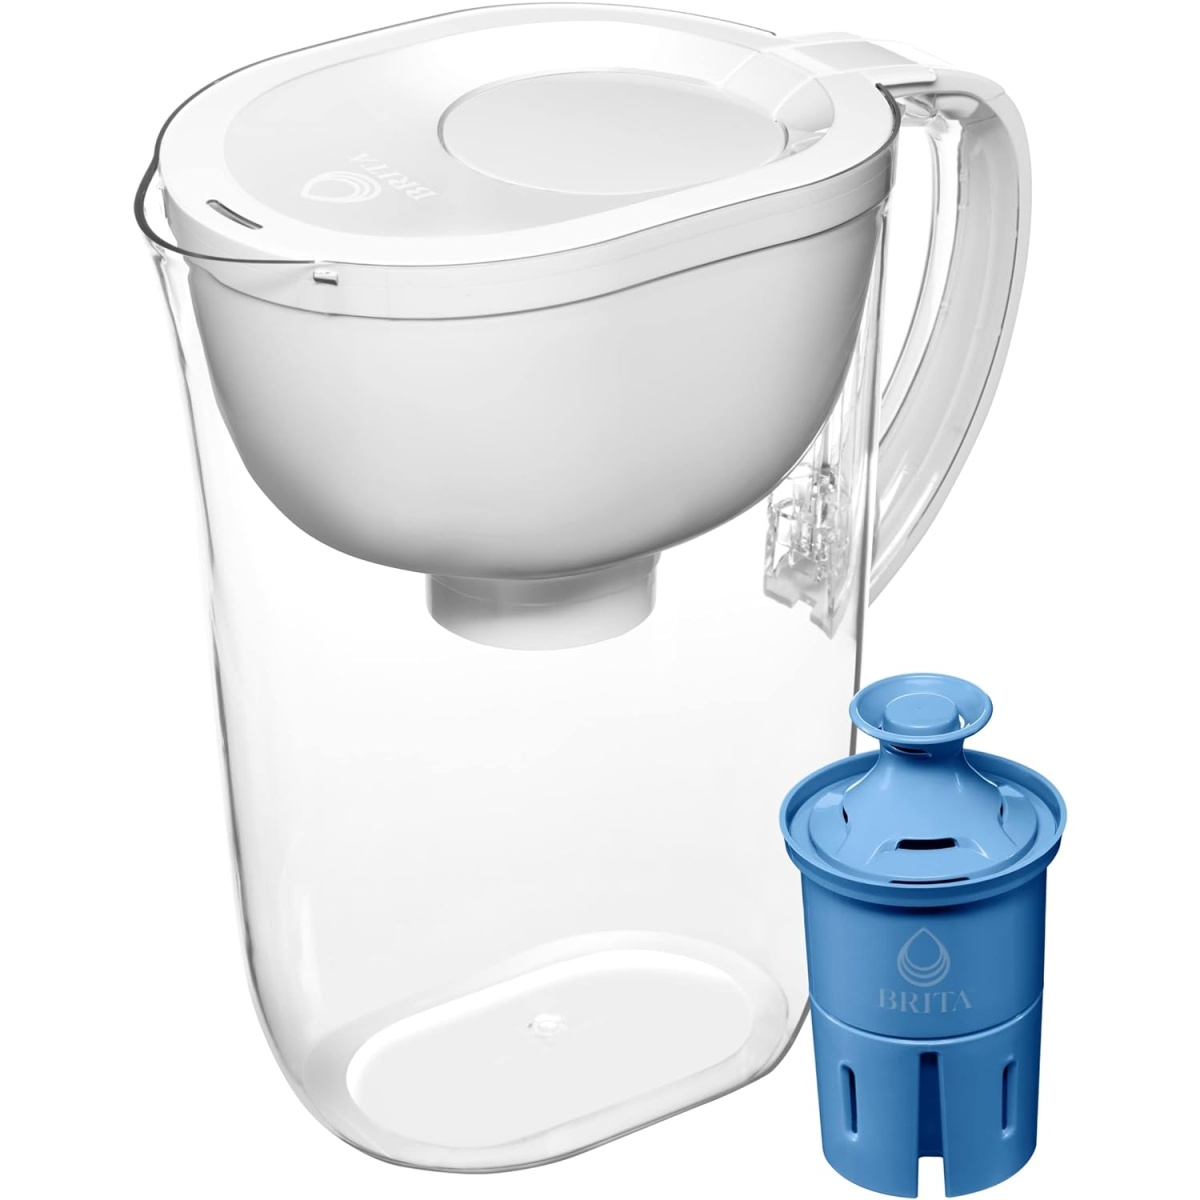 Brita Tahoe 10-Cup Pitcher with Elite Filter Review